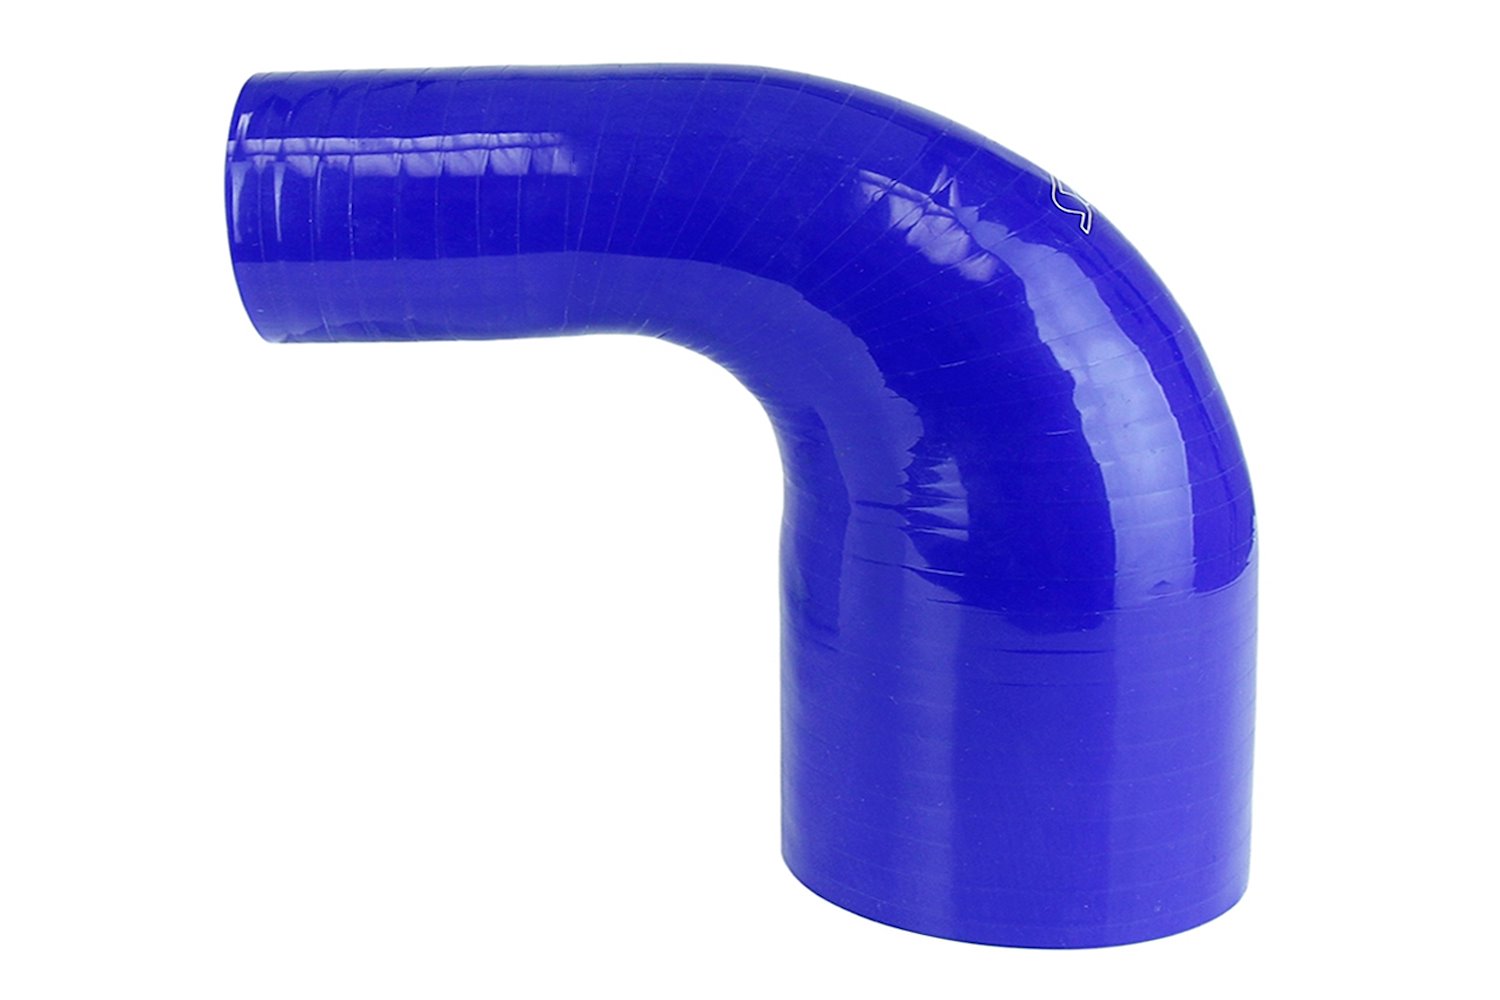 HTSER90-375-400-BLUE Silicone 90-Degree Elbow Hose, High-Temp 4-Ply Reinforced, 3-3/4 in. - 4 in. ID, Blue